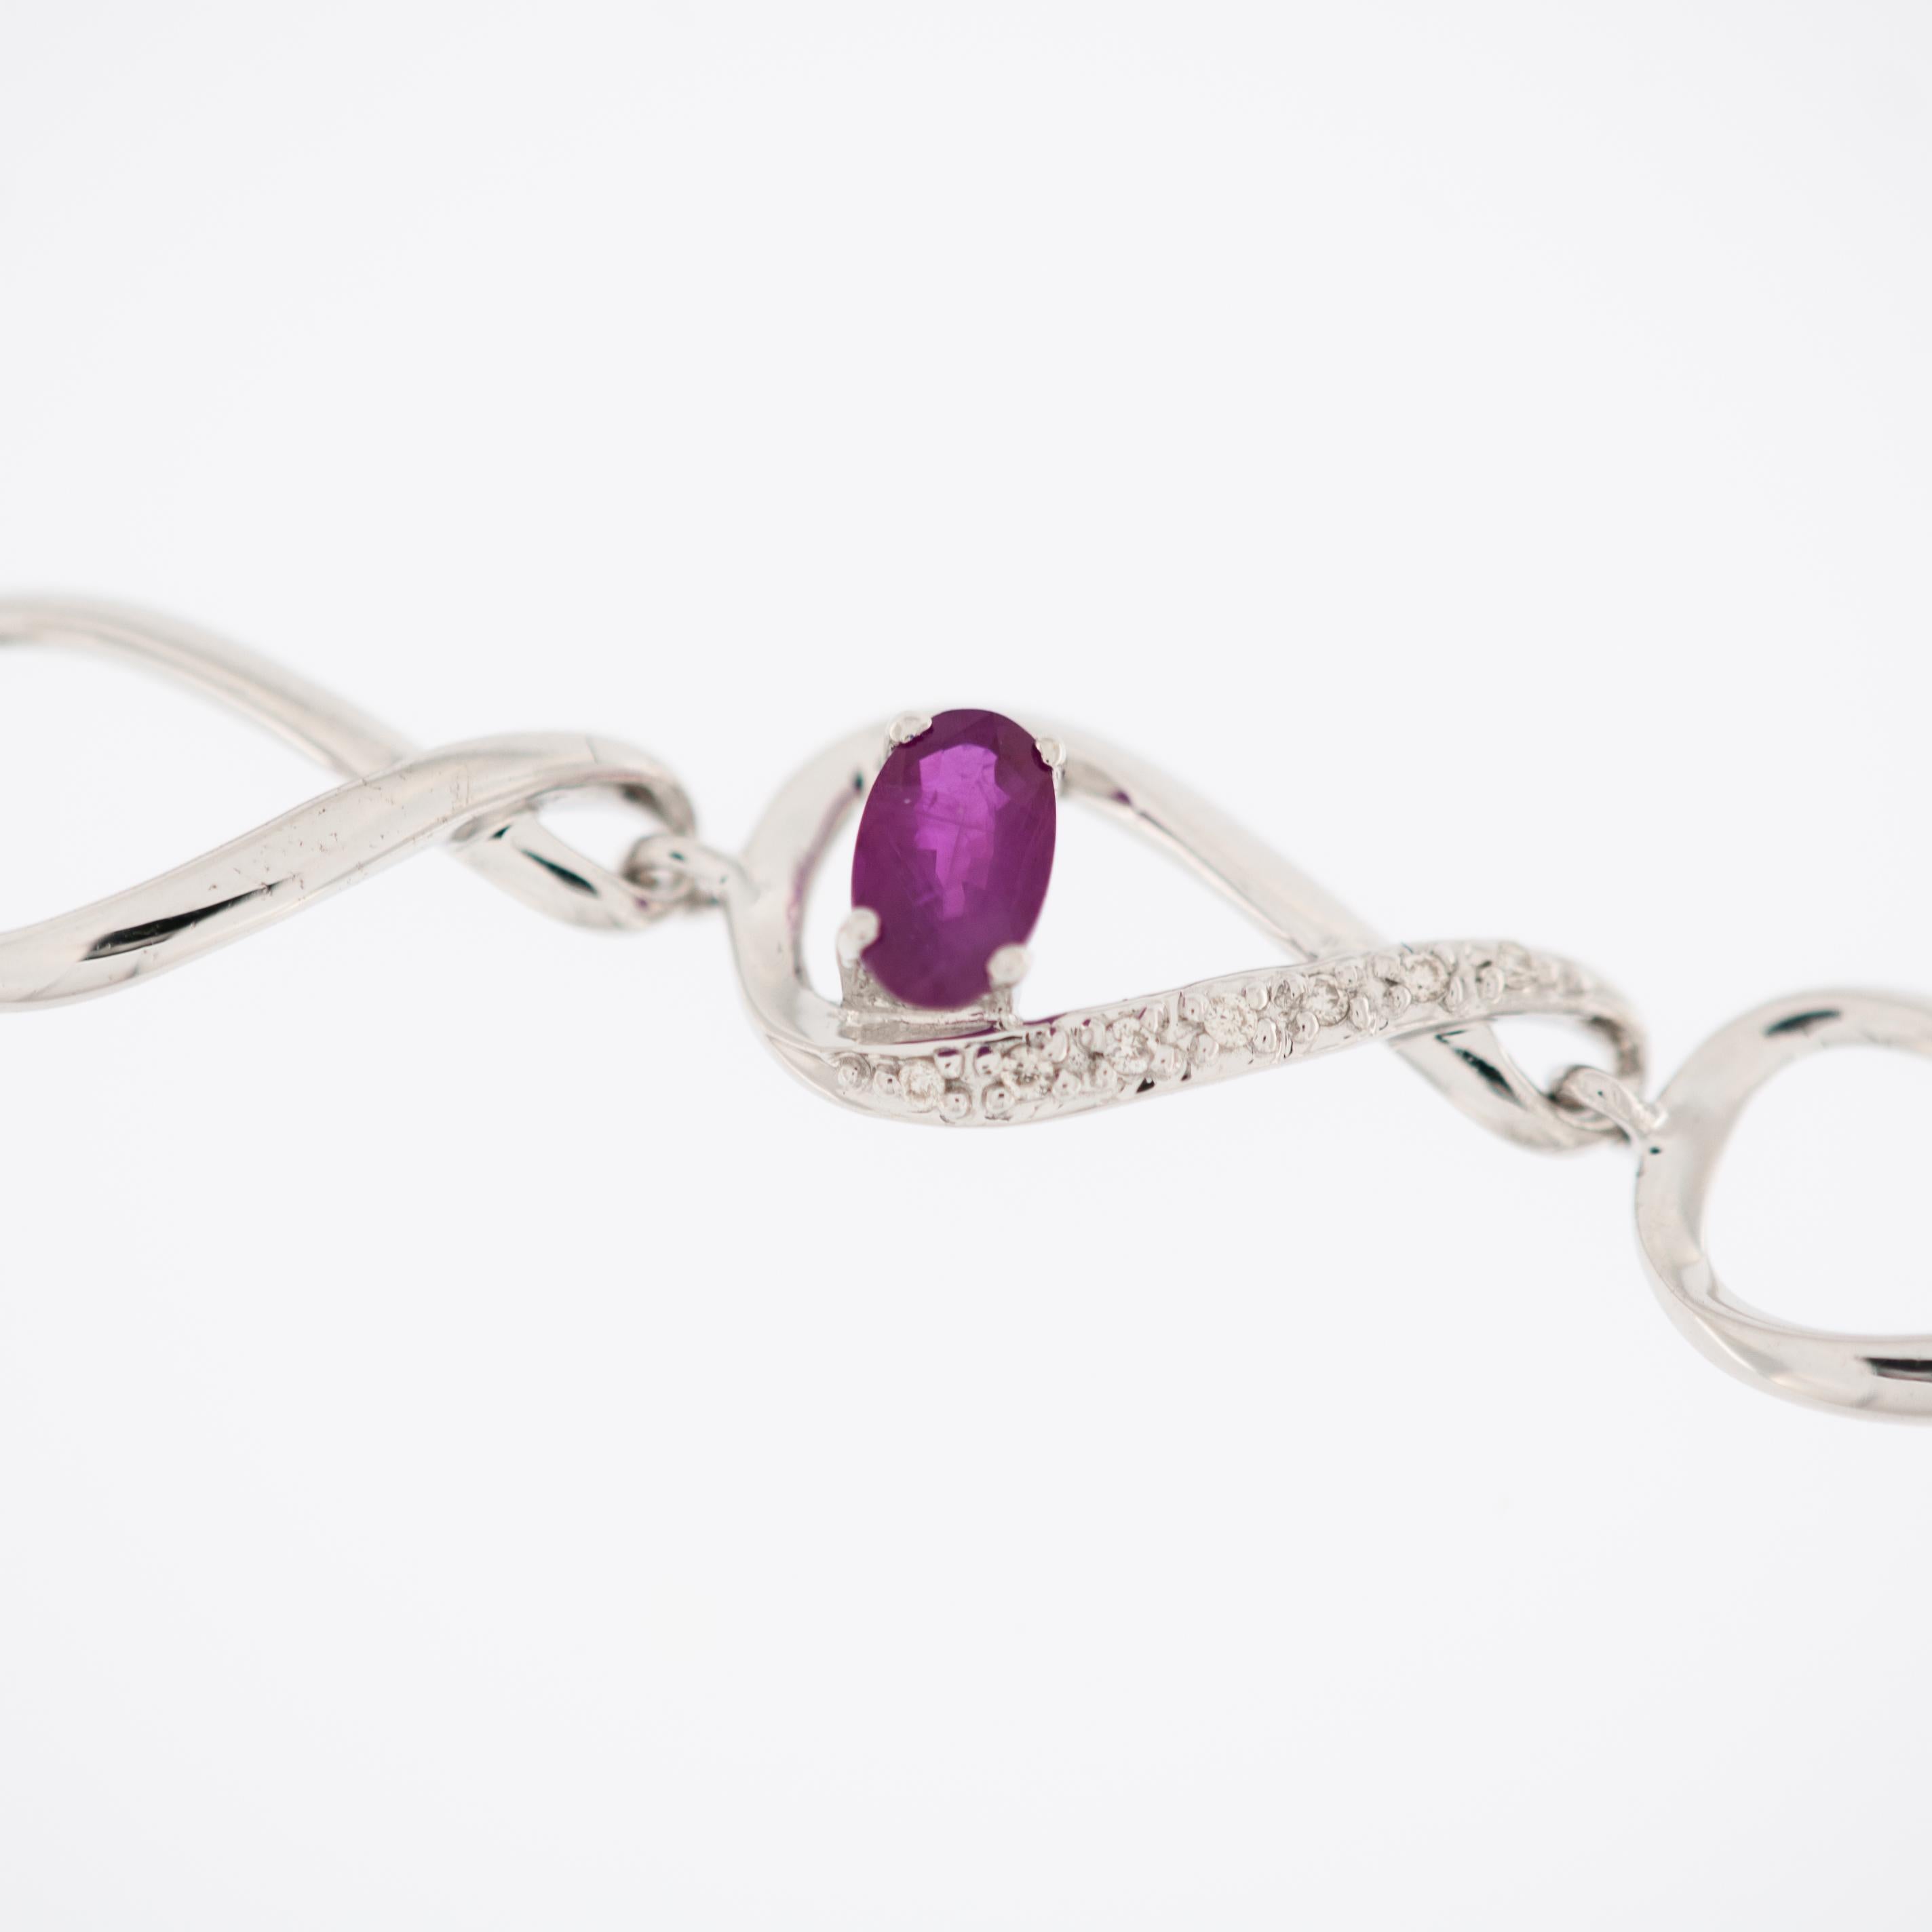 Modern Belgian 18kt White Gold Bracelet with Diamonds and Rubies In Excellent Condition For Sale In Esch-Sur-Alzette, LU